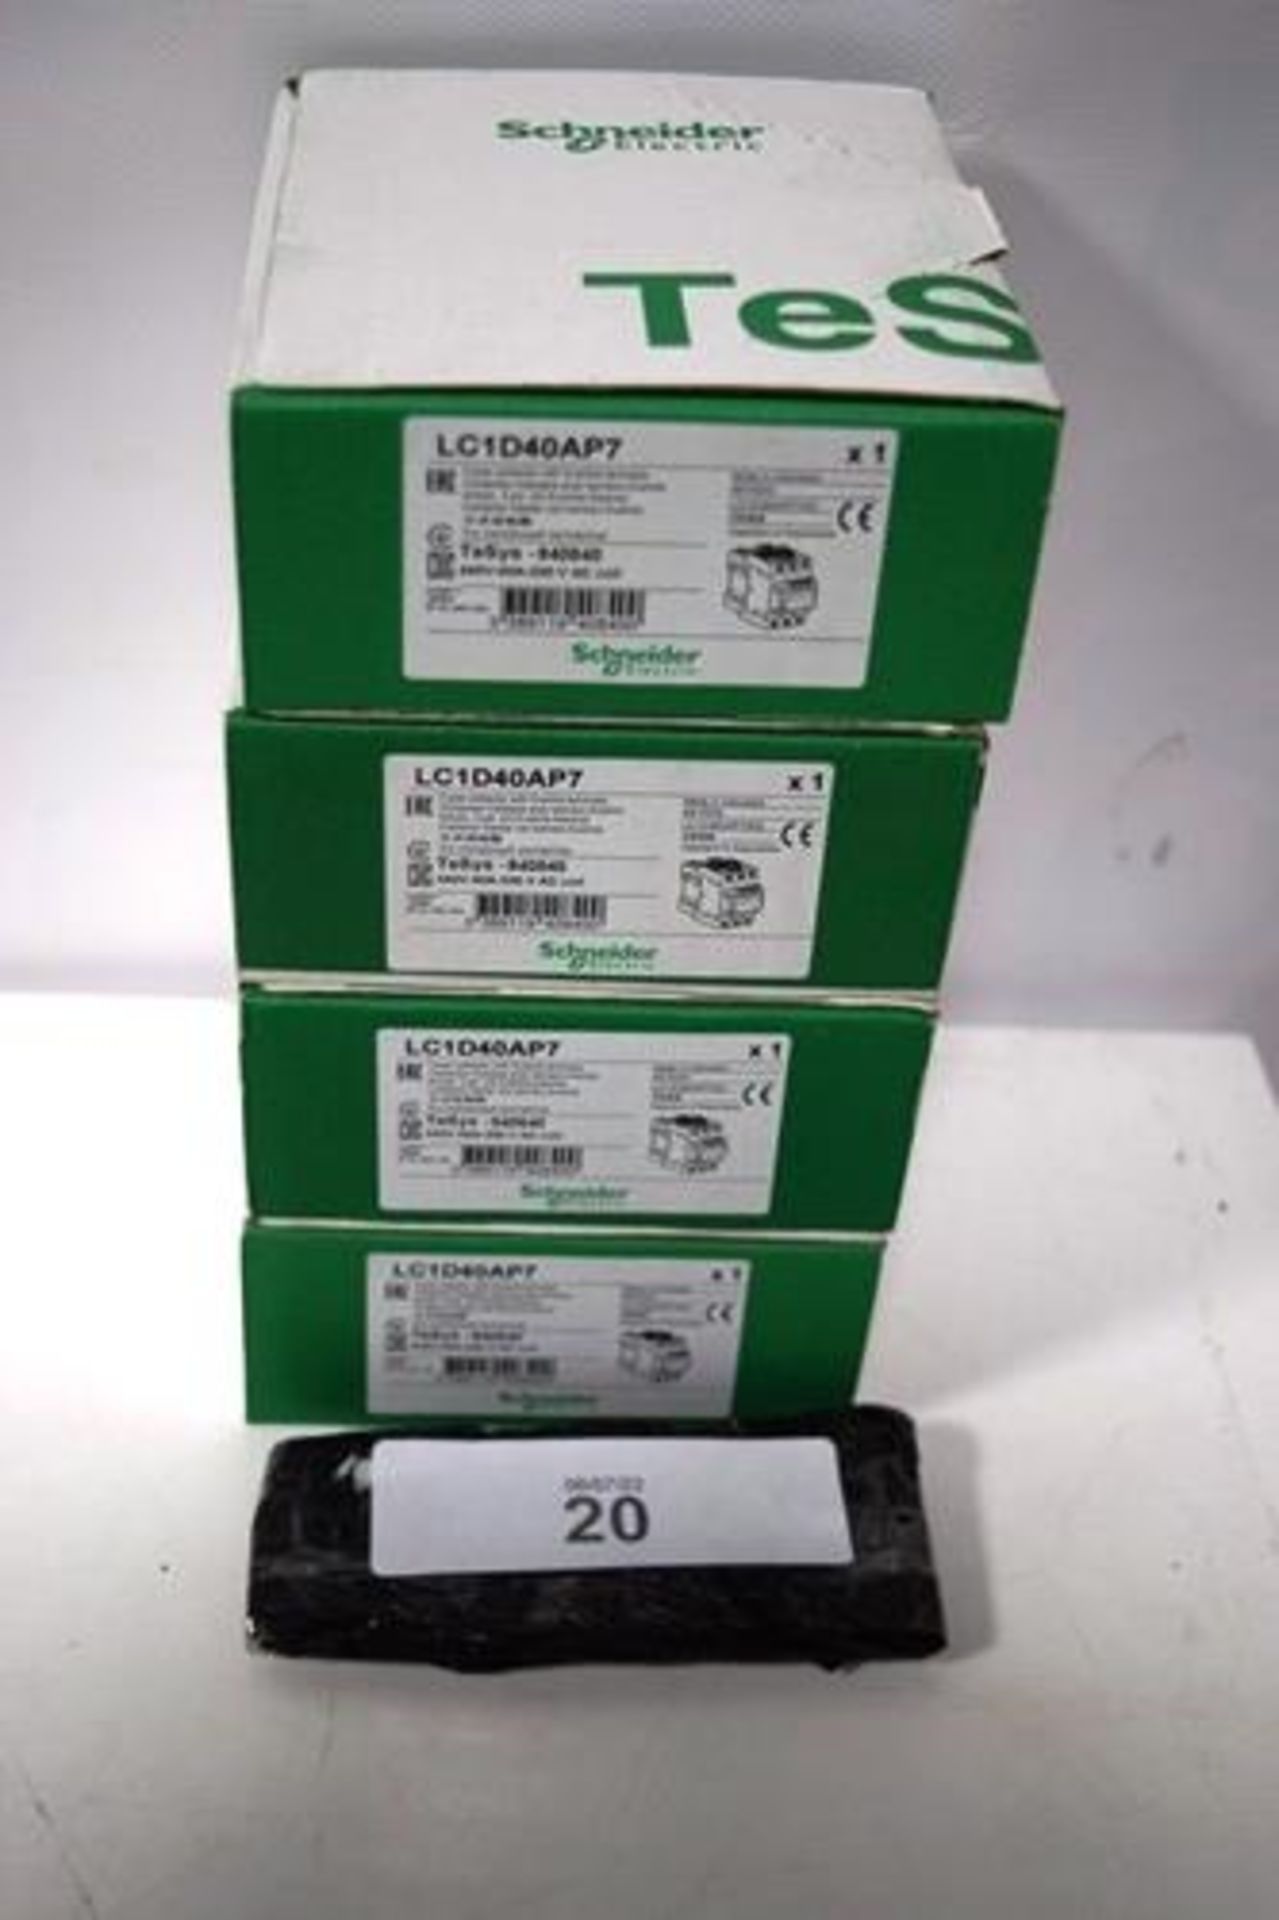 4 x Schneider 3 pole contactor with Everlink terminals, model LC1D40AP7 - New in box (SW8)